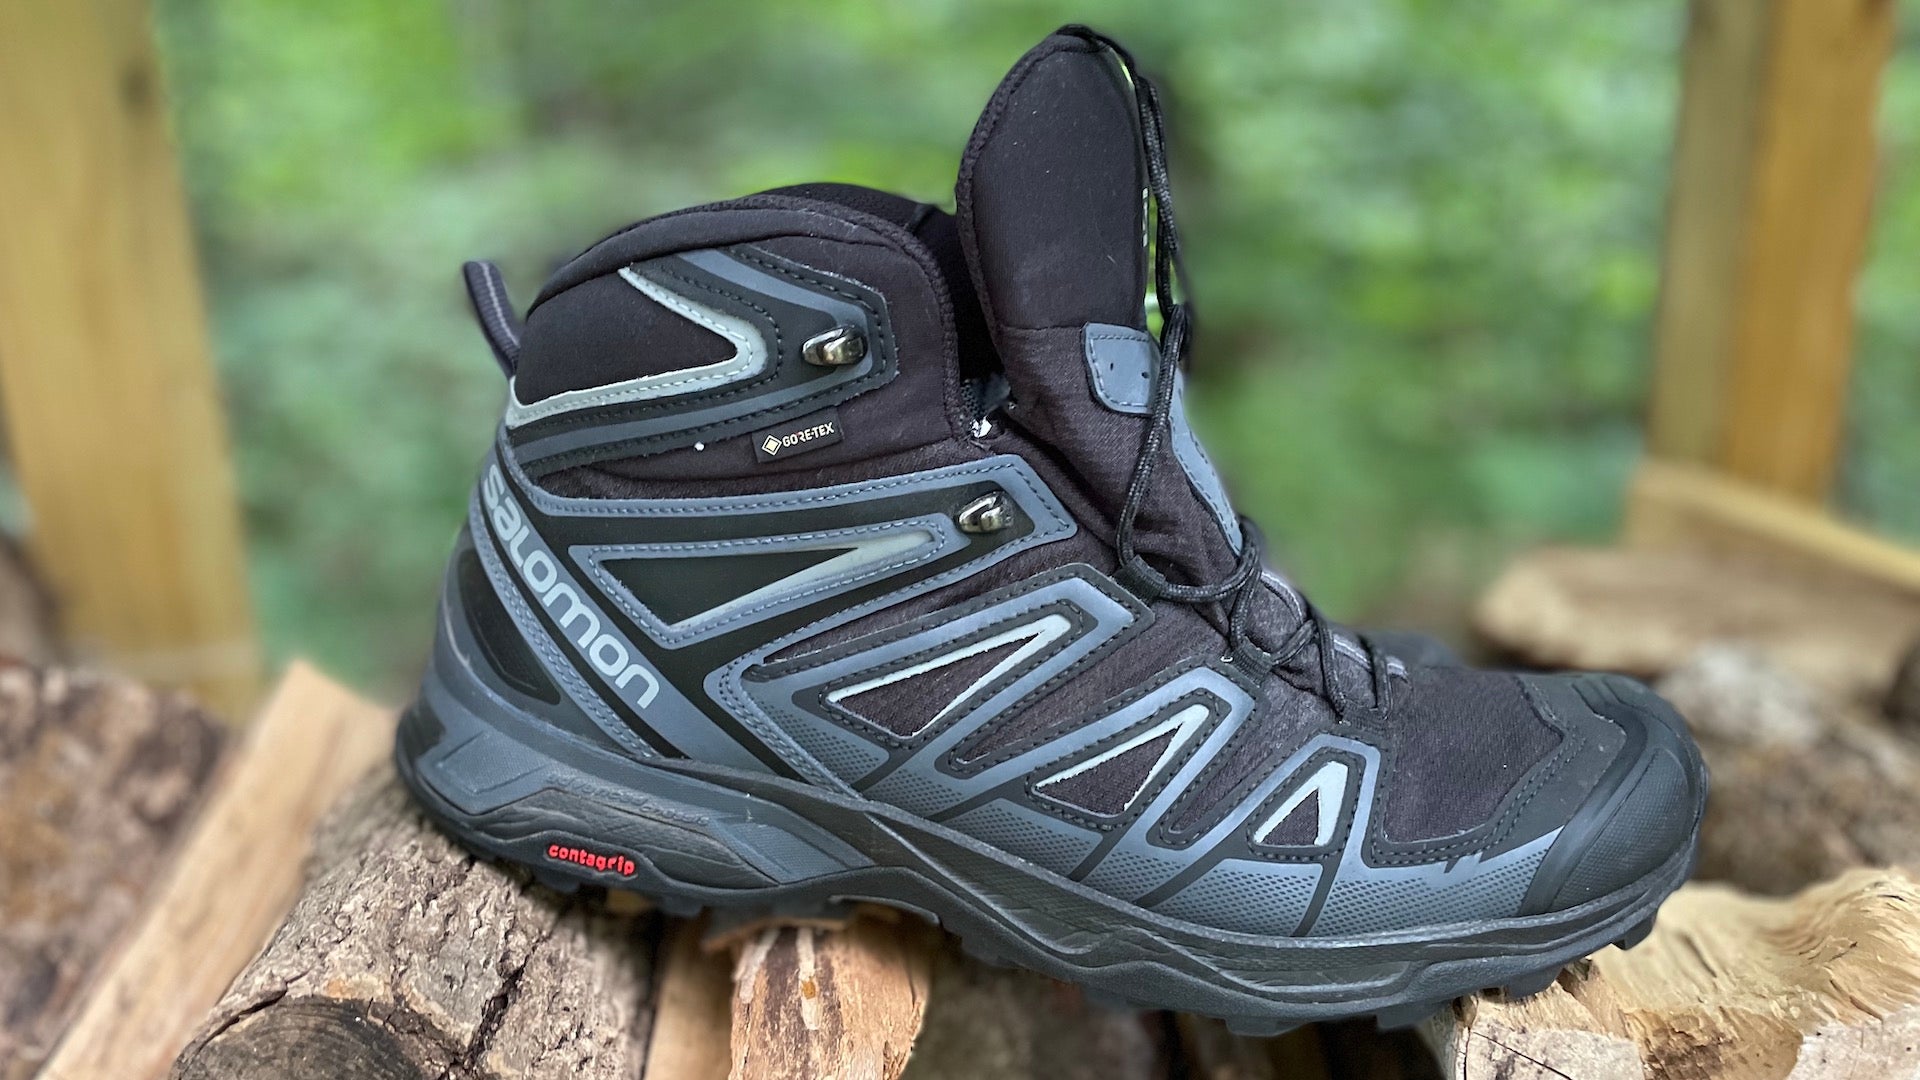 Bounty Jolly Telemacos Salomon X Ultra 3 Mid Gore-Tex Boots (Review) 2021 - Task & Purpose